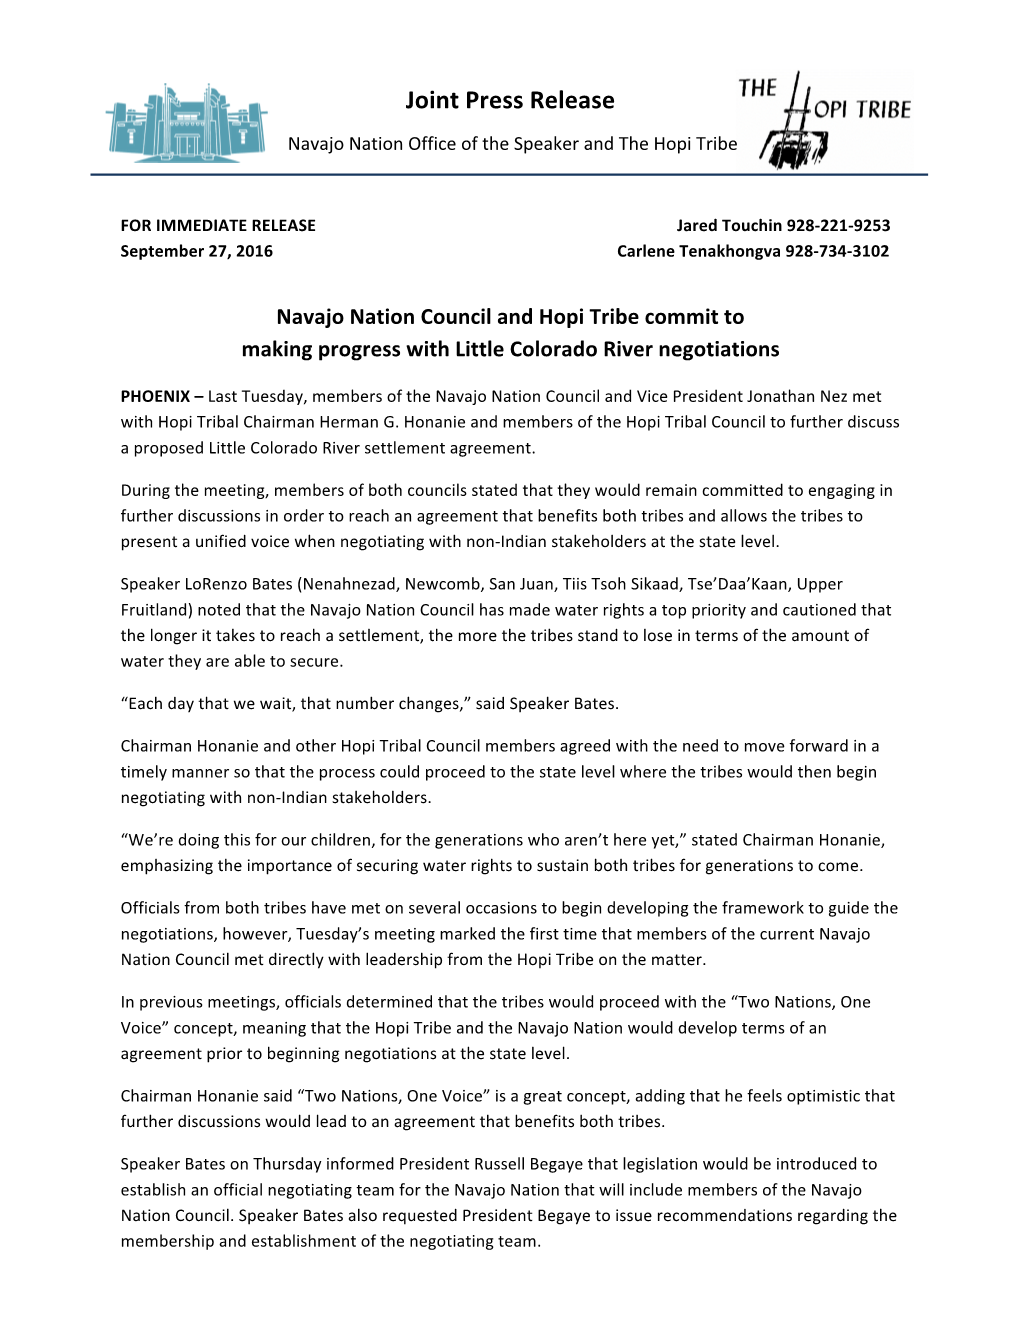 Navajo Nation Council and Hopi Tribe Commit to Making Progress with Little Colorado River Negotiations